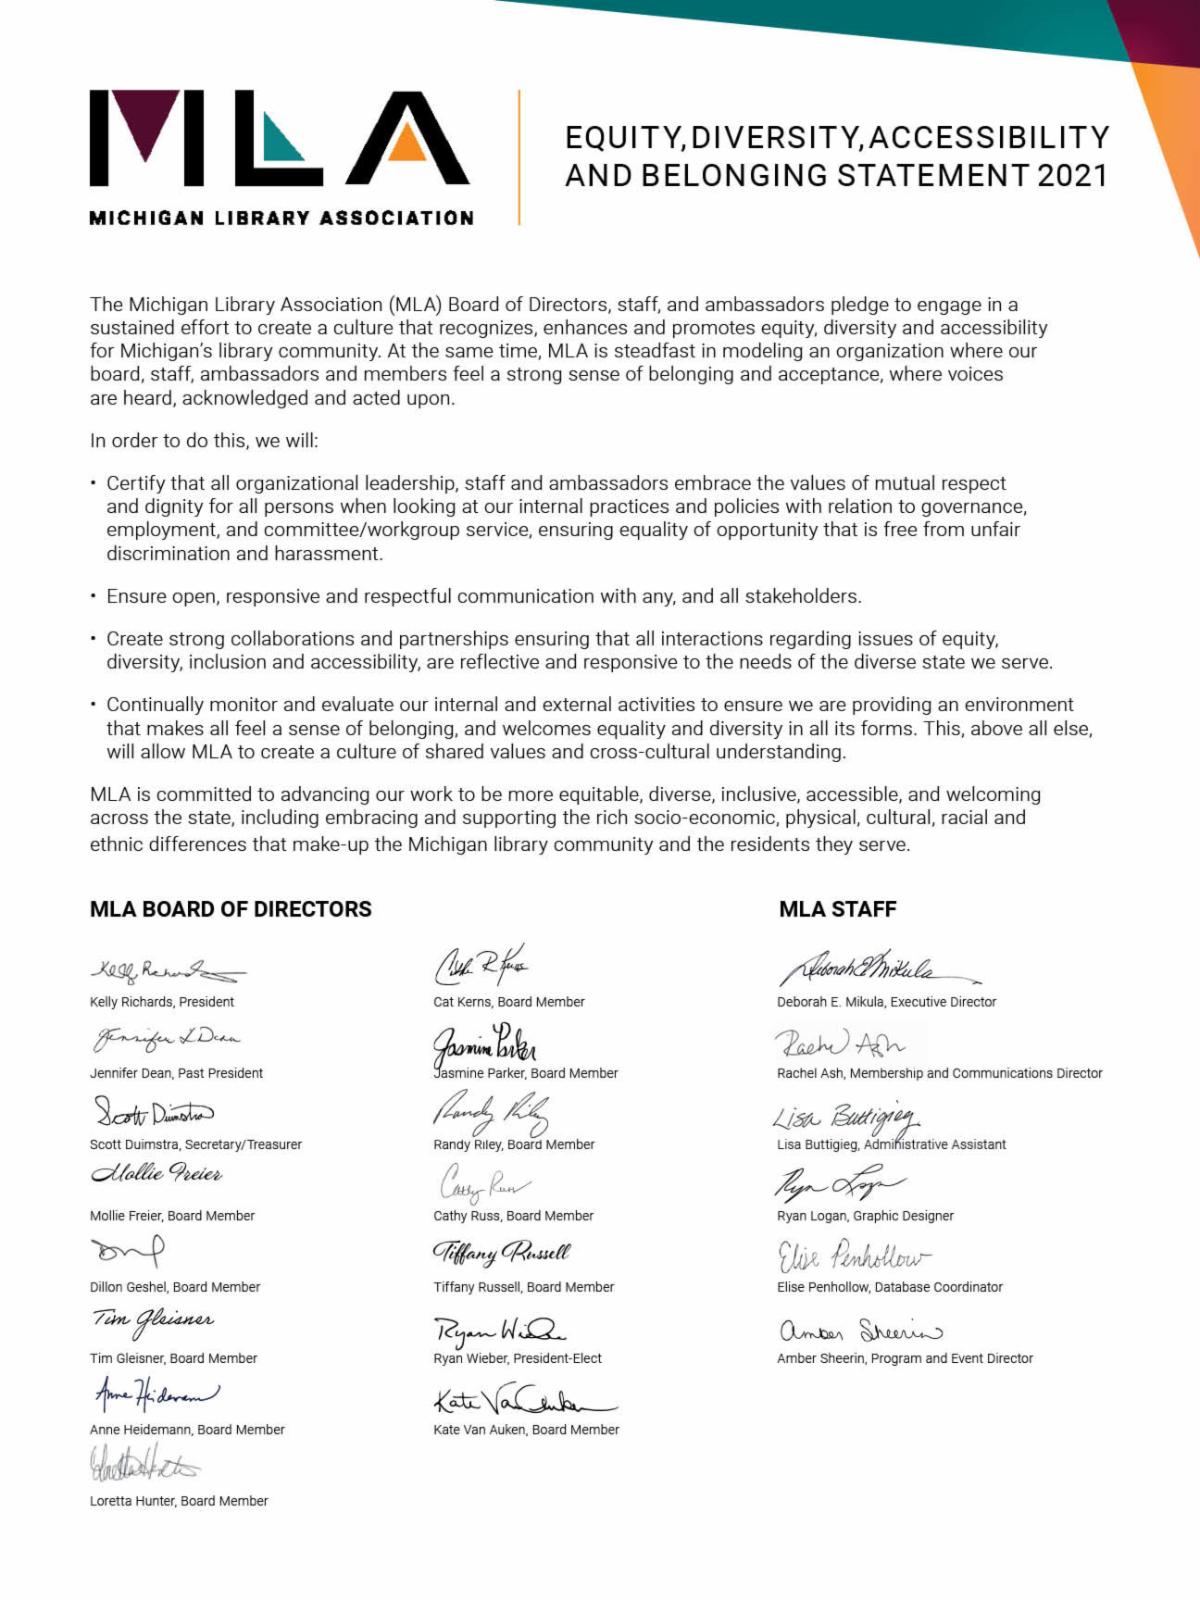 Image of equity, diversity, inclusion and belonging statement signed by MLA 2021 Board and staff